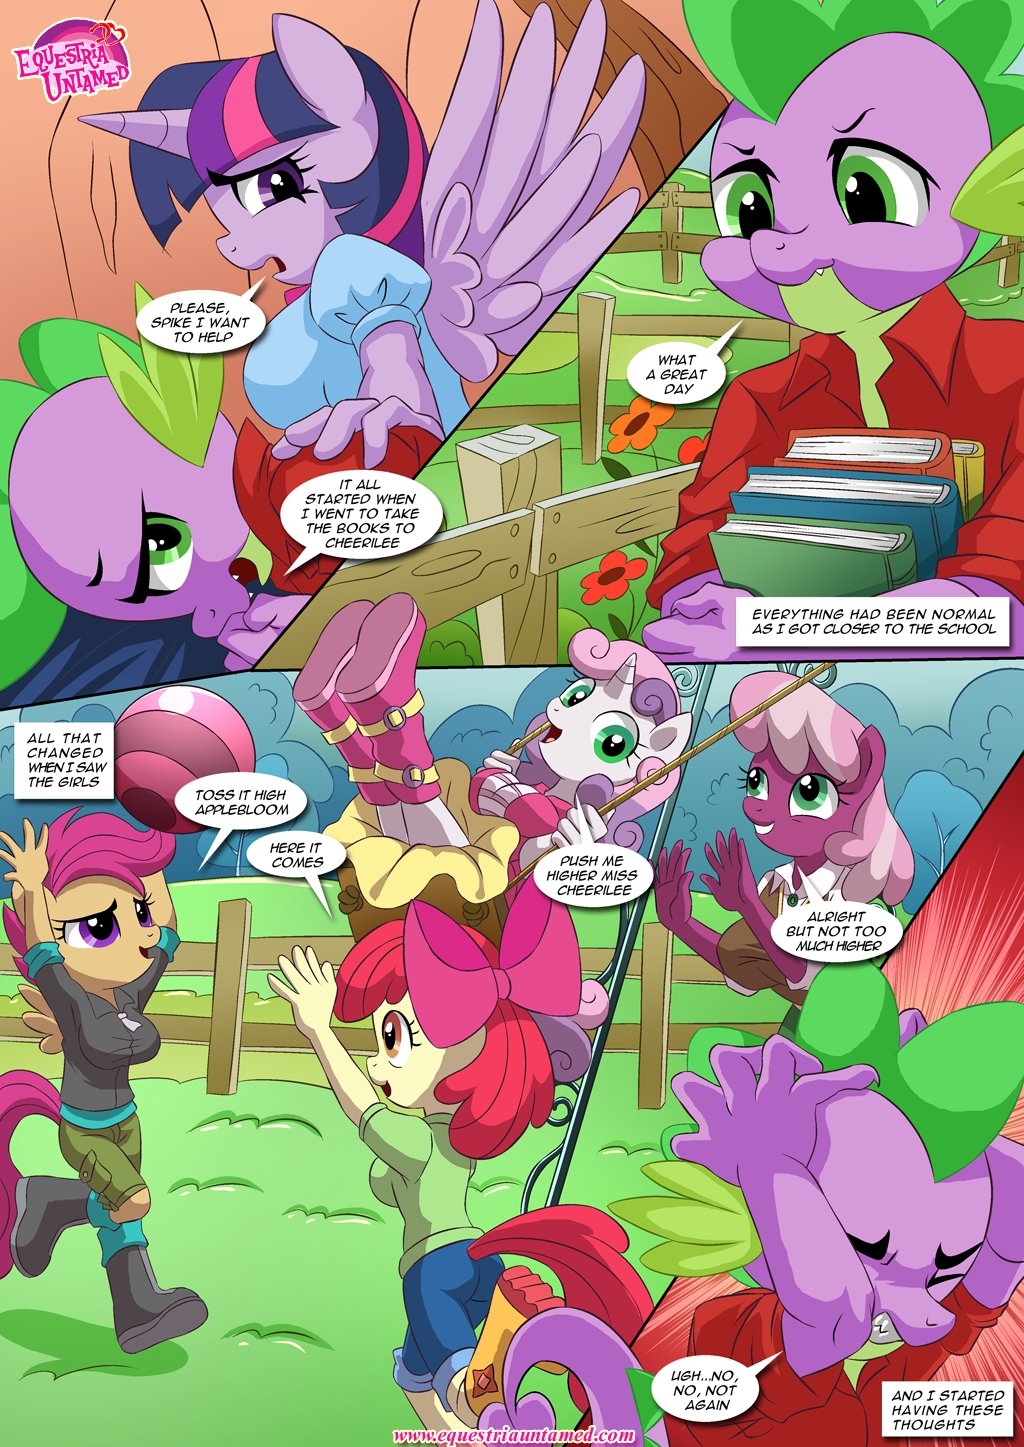 [Palcomix] Sex Ed with Miss Twilight Sparkle (My Little Pony Friendship is Magic) 5